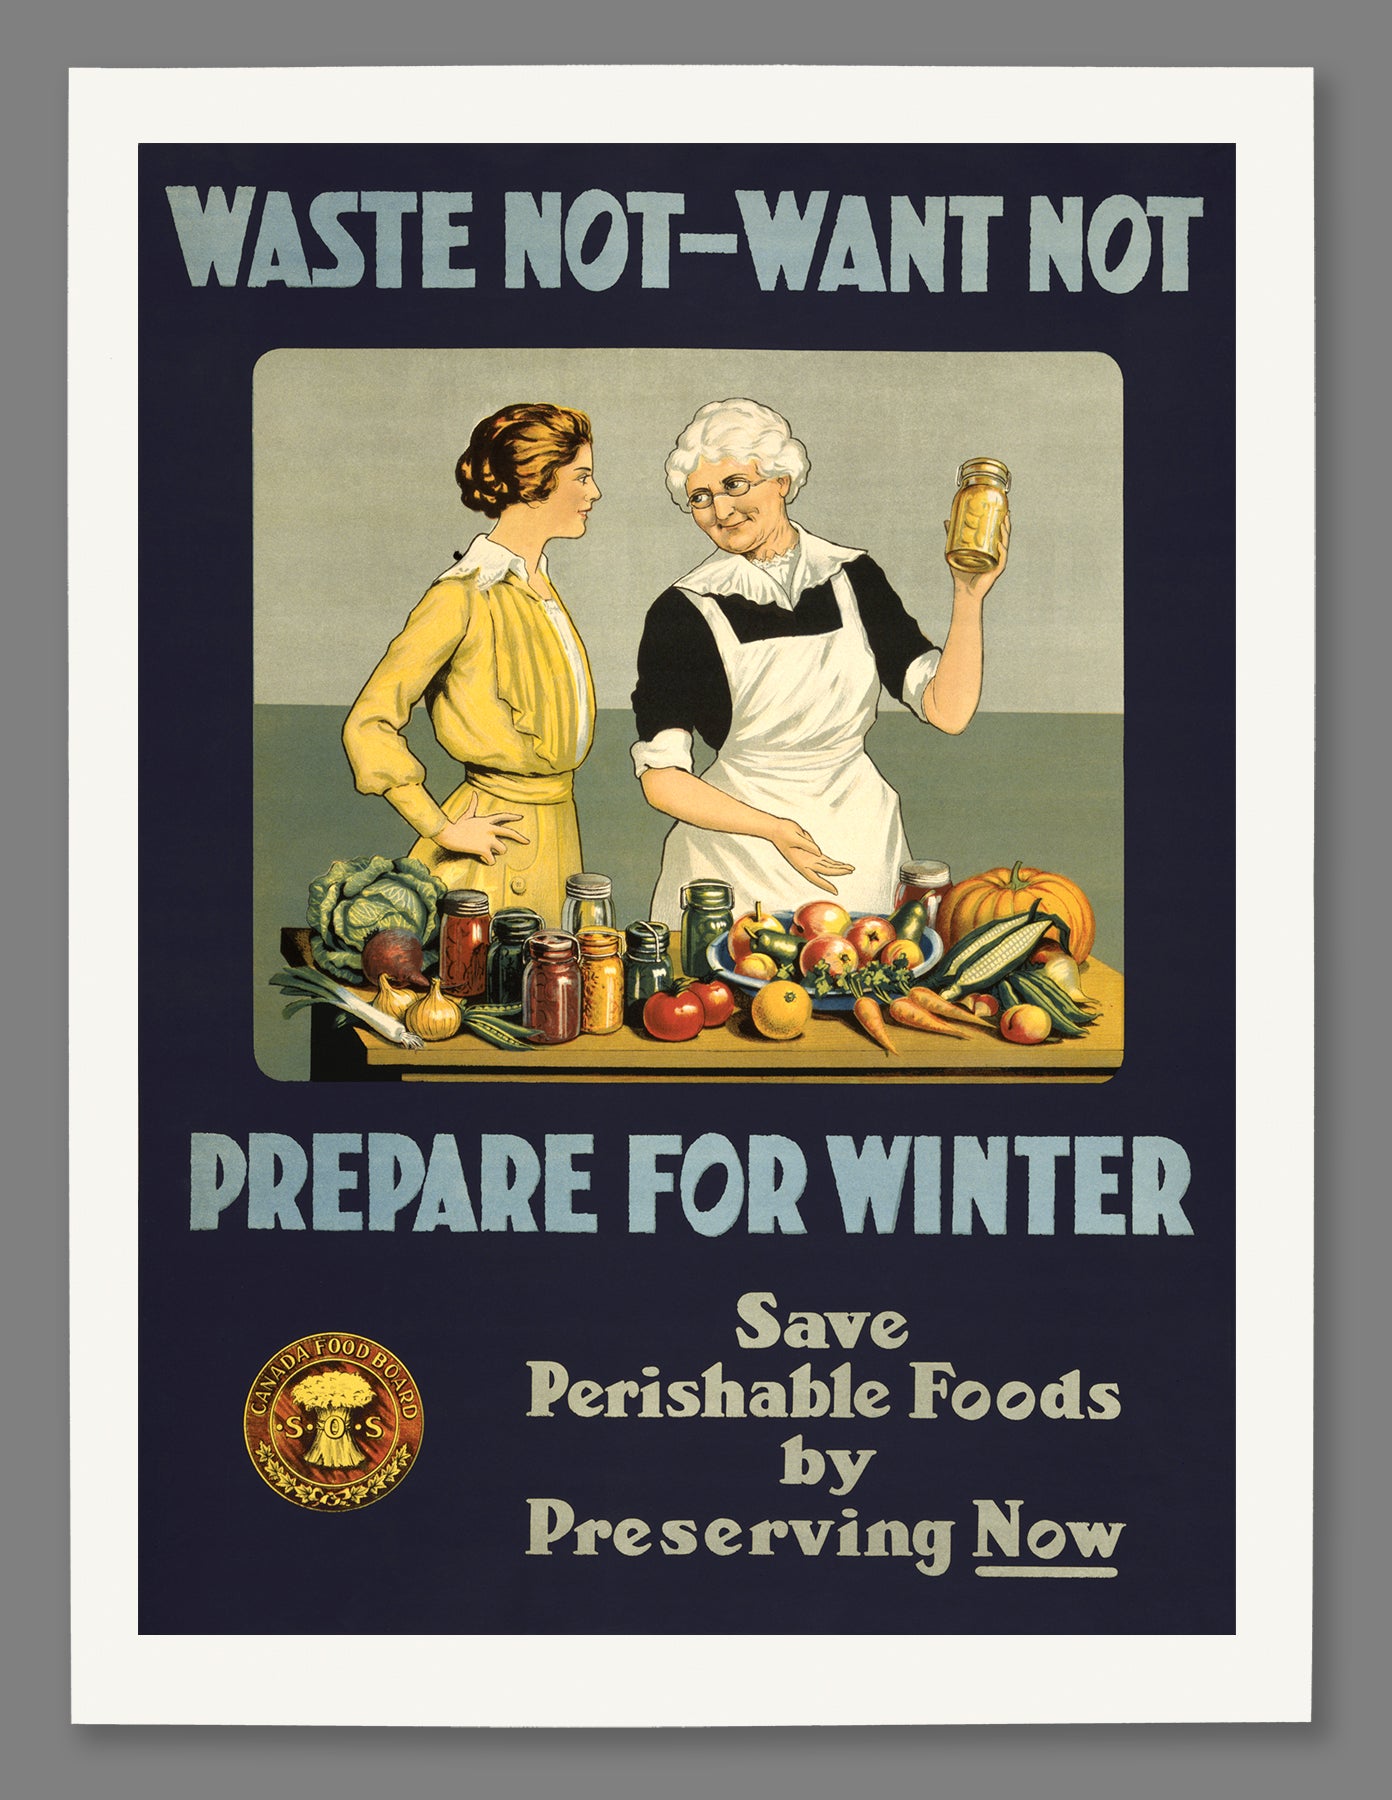 A mockup of a paper print reproduction of a vintage poster urging viewers to preserve food for winter